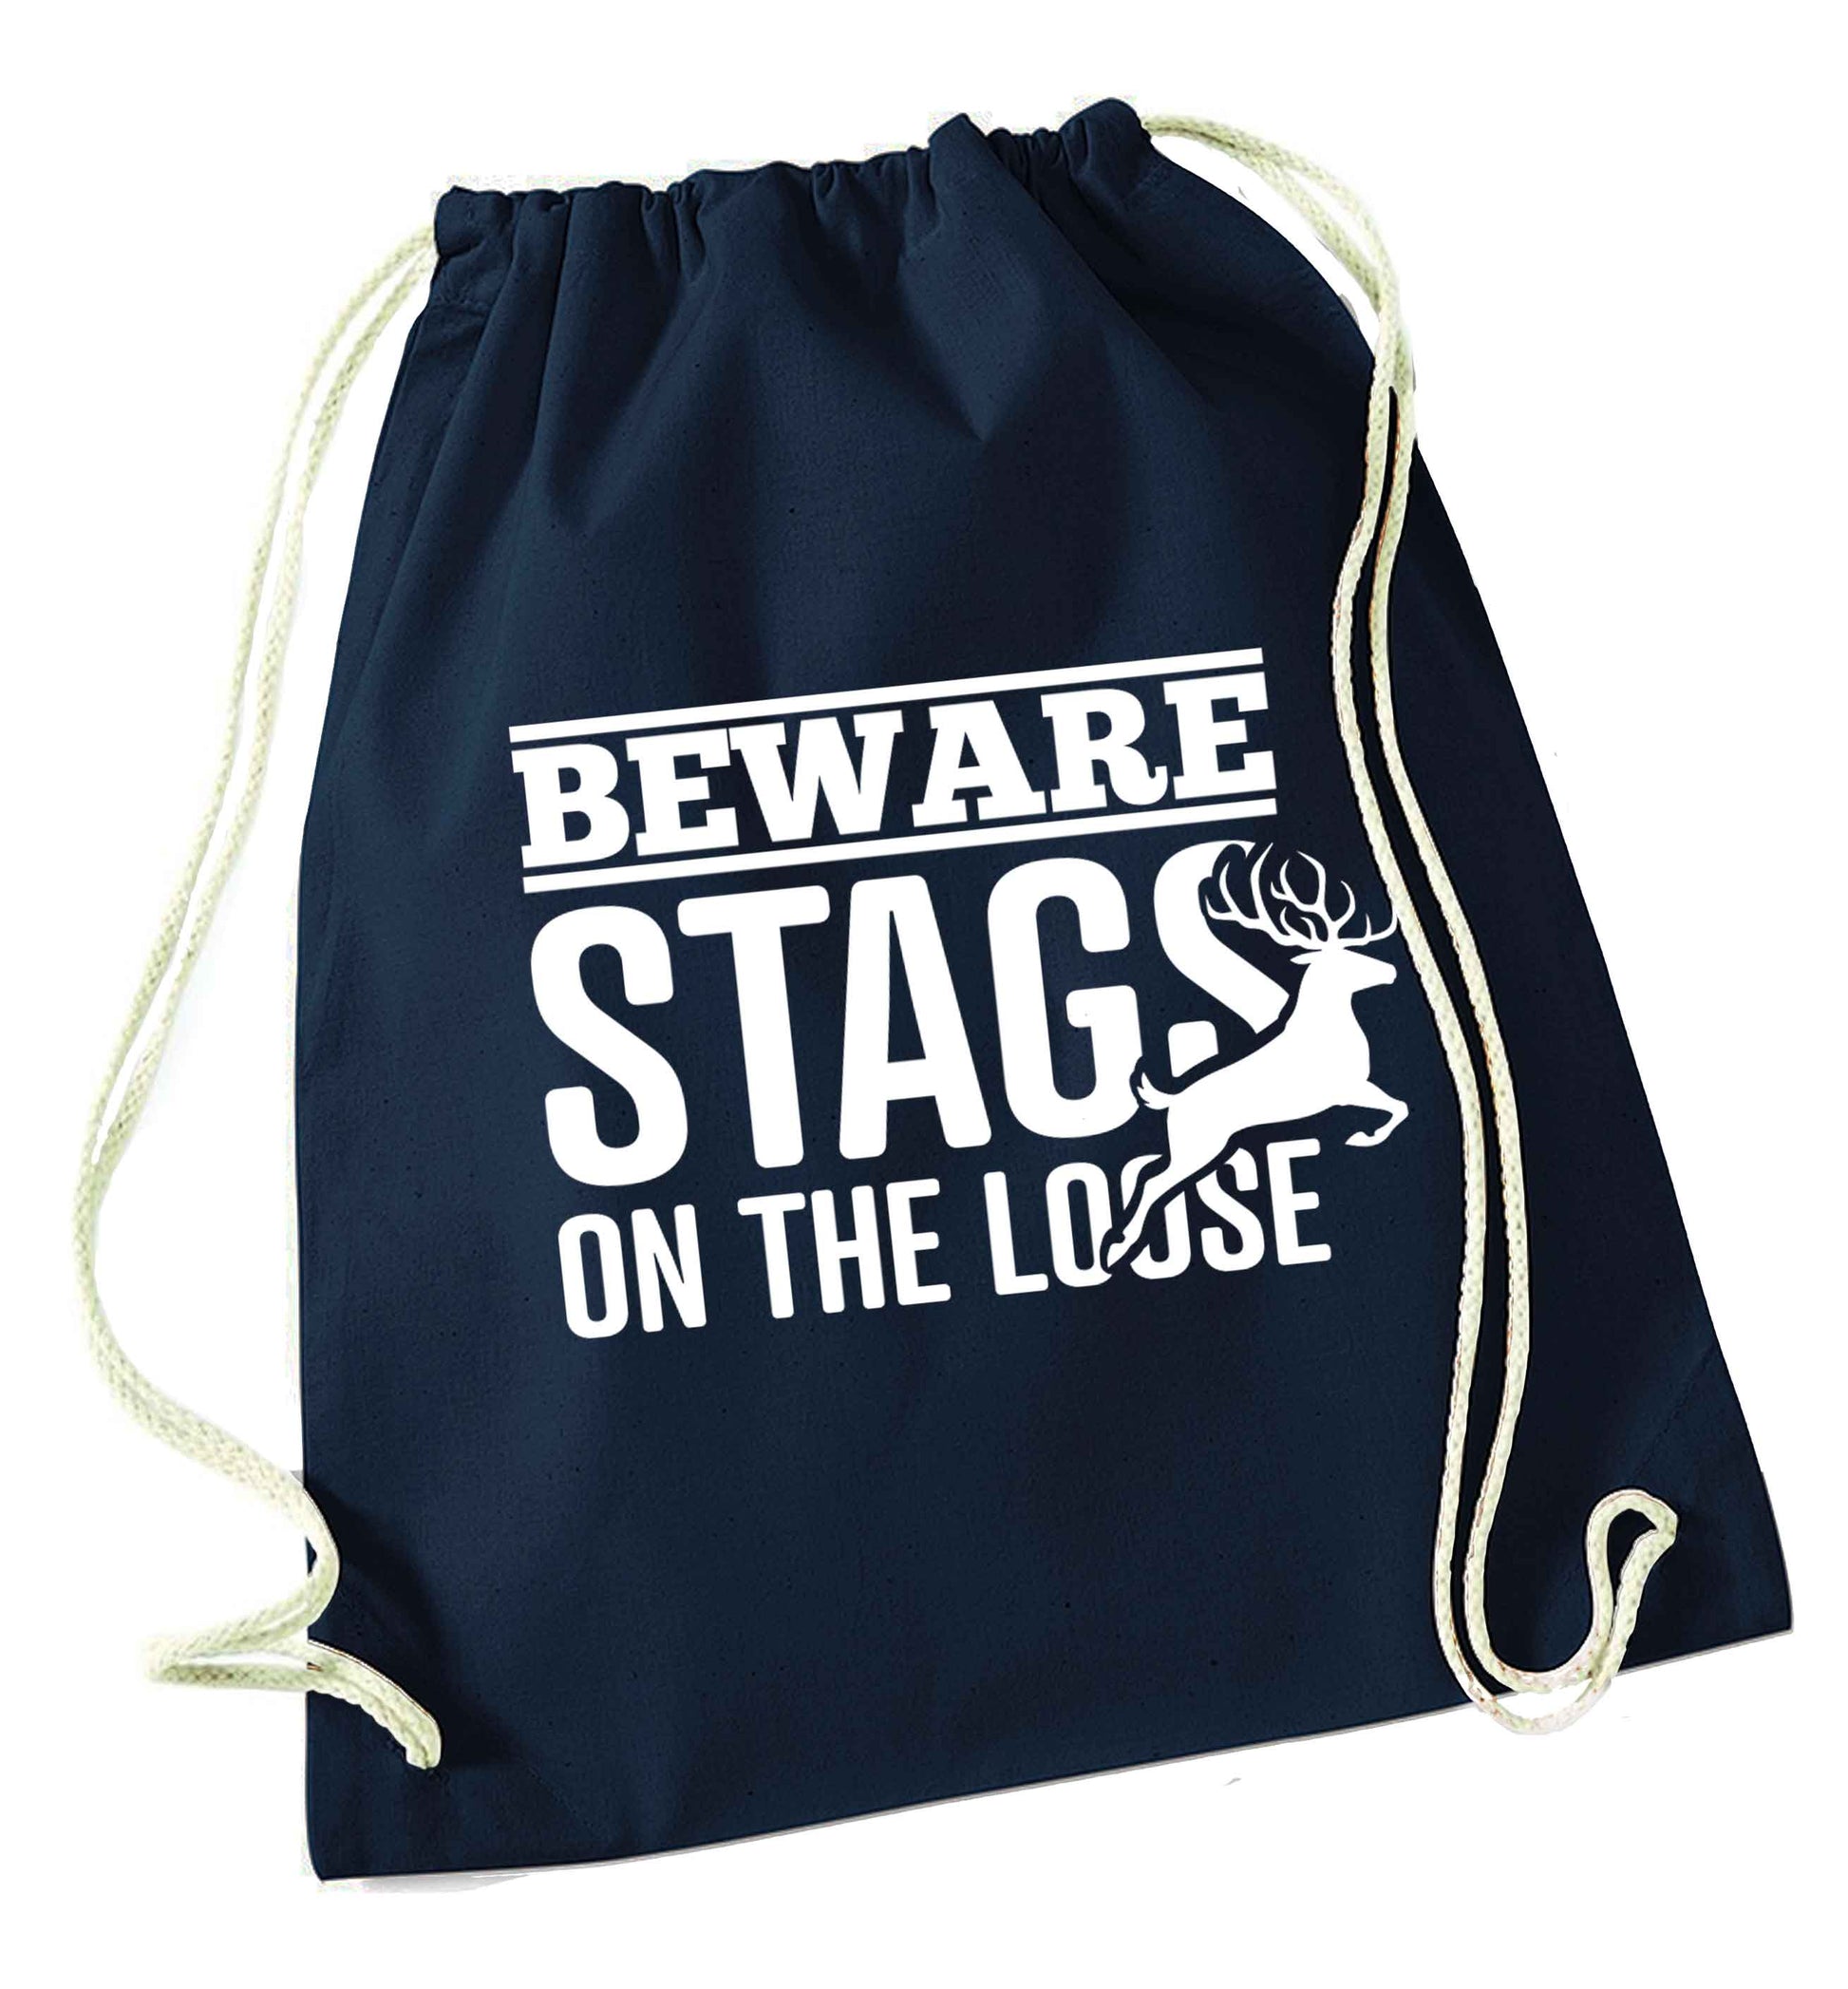 Beware stags on the loose navy drawstring bag